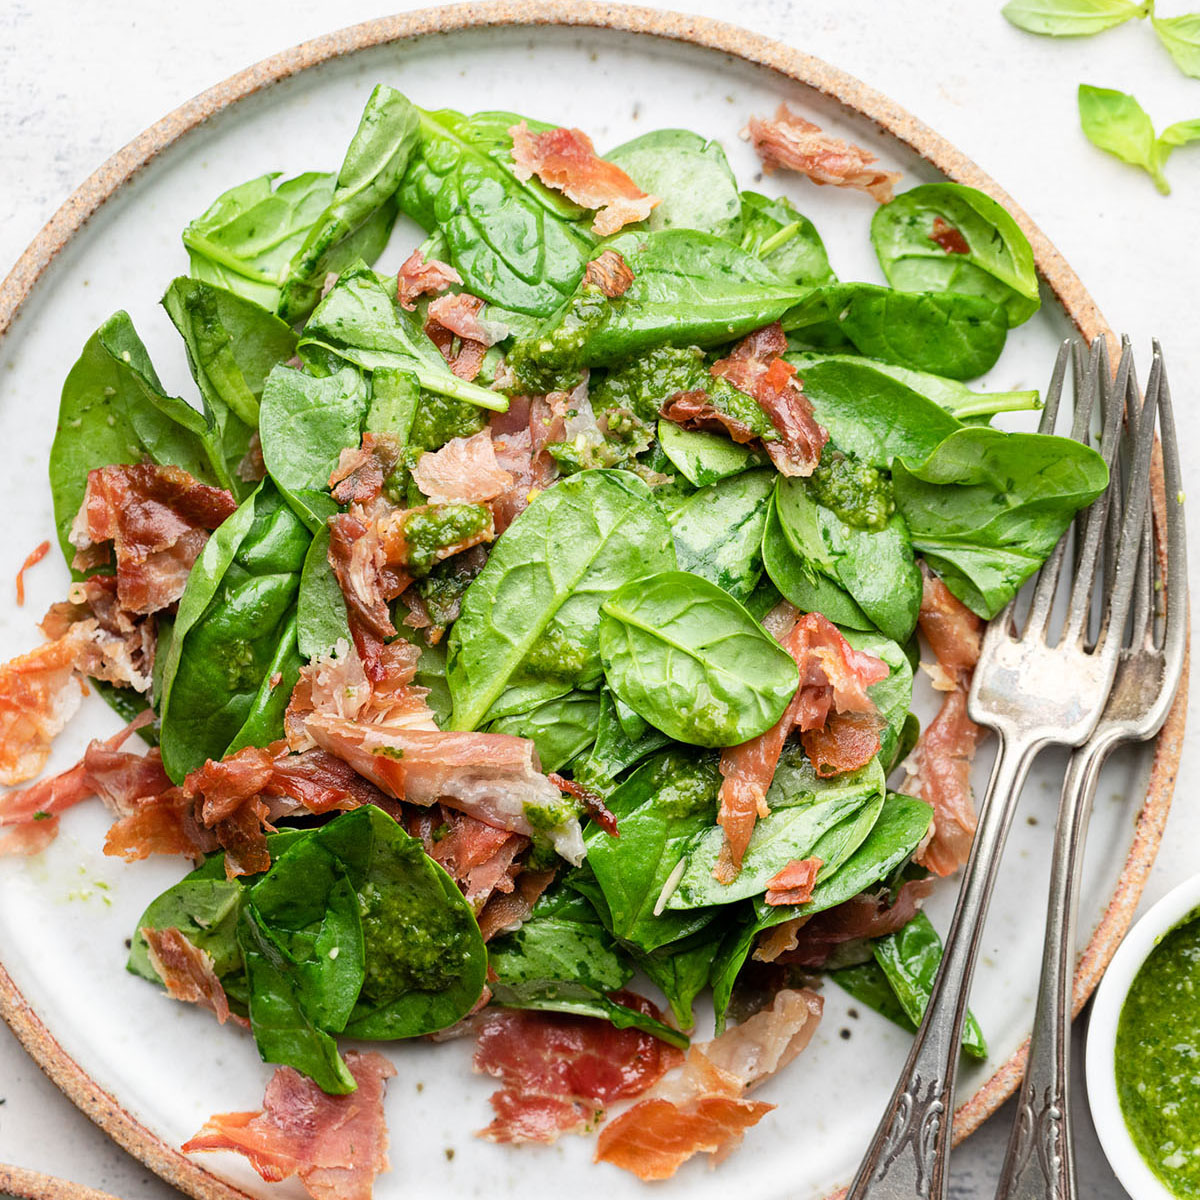 Spinach salad on a white plate, topped with crispy prosciutto.